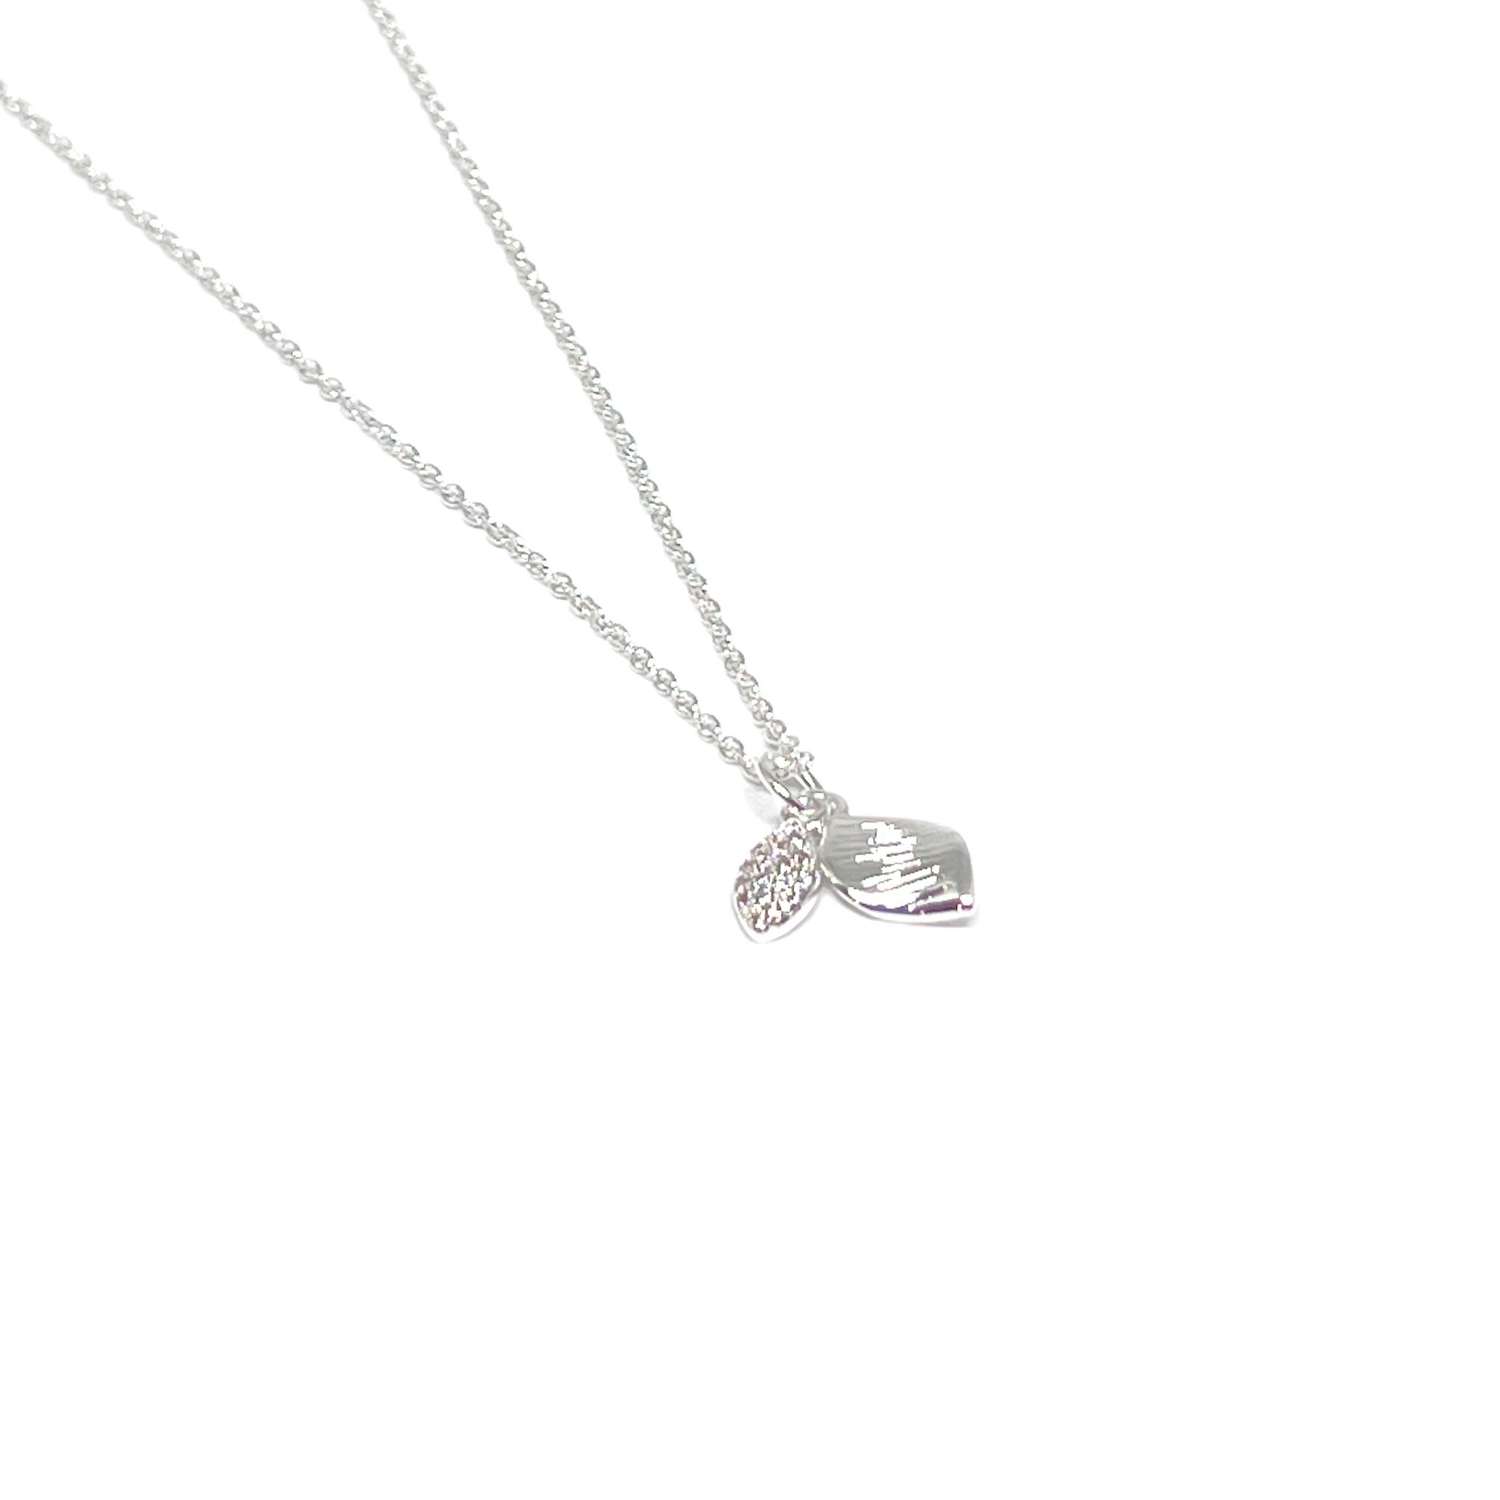 Renee Sparkle Necklace - Silver